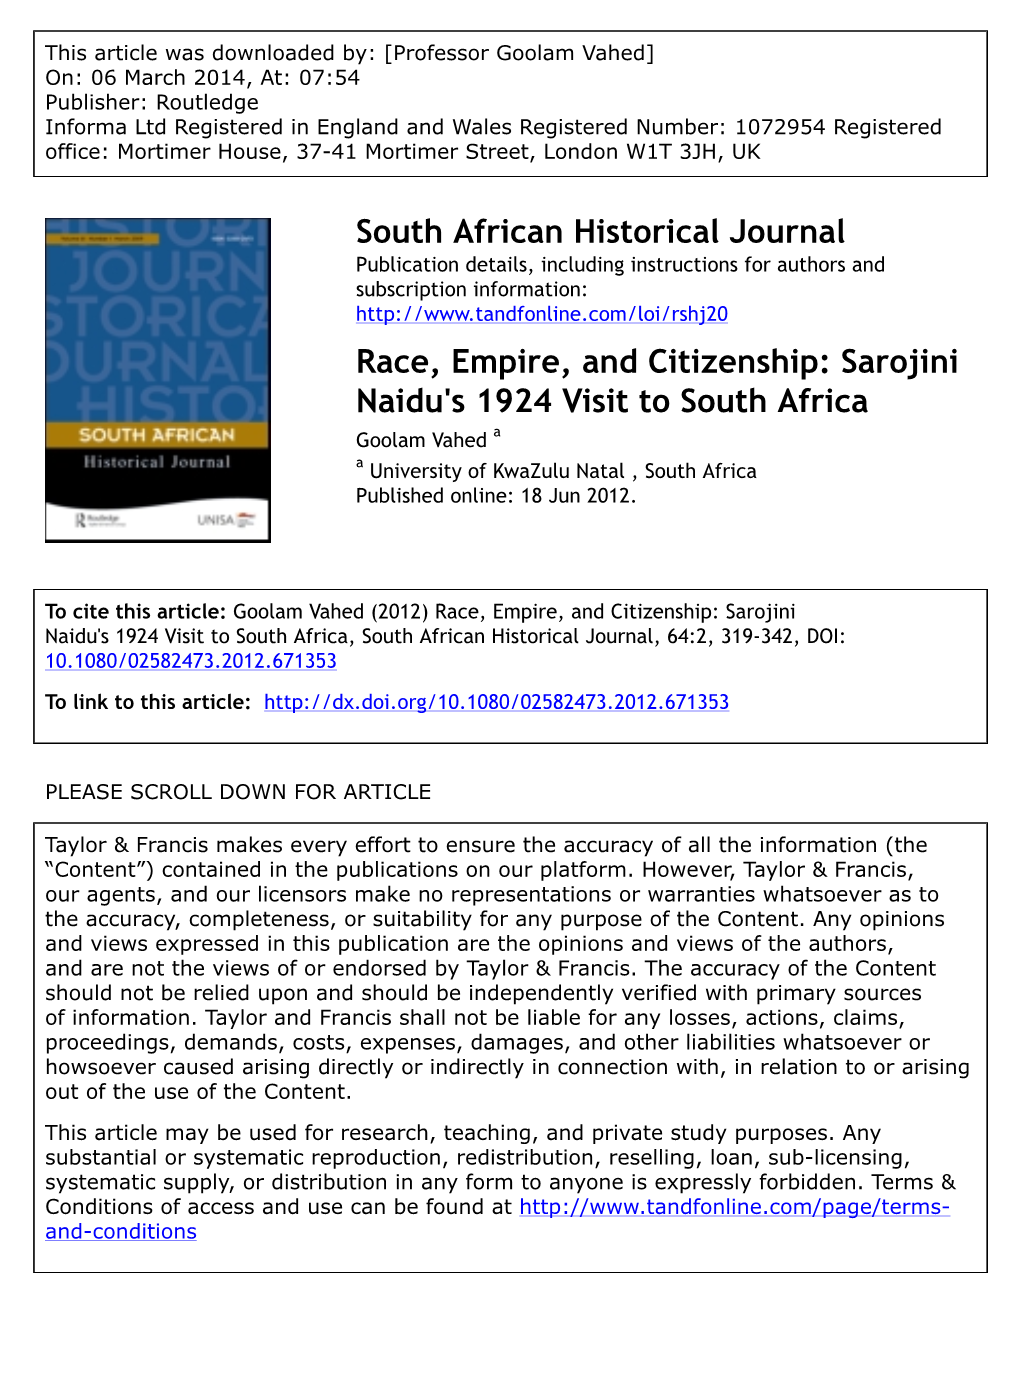 Sarojini Naidu's 1924 Visit to South Africa Goolam Vahed a a University of Kwazulu Natal , South Africa Published Online: 18 Jun 2012